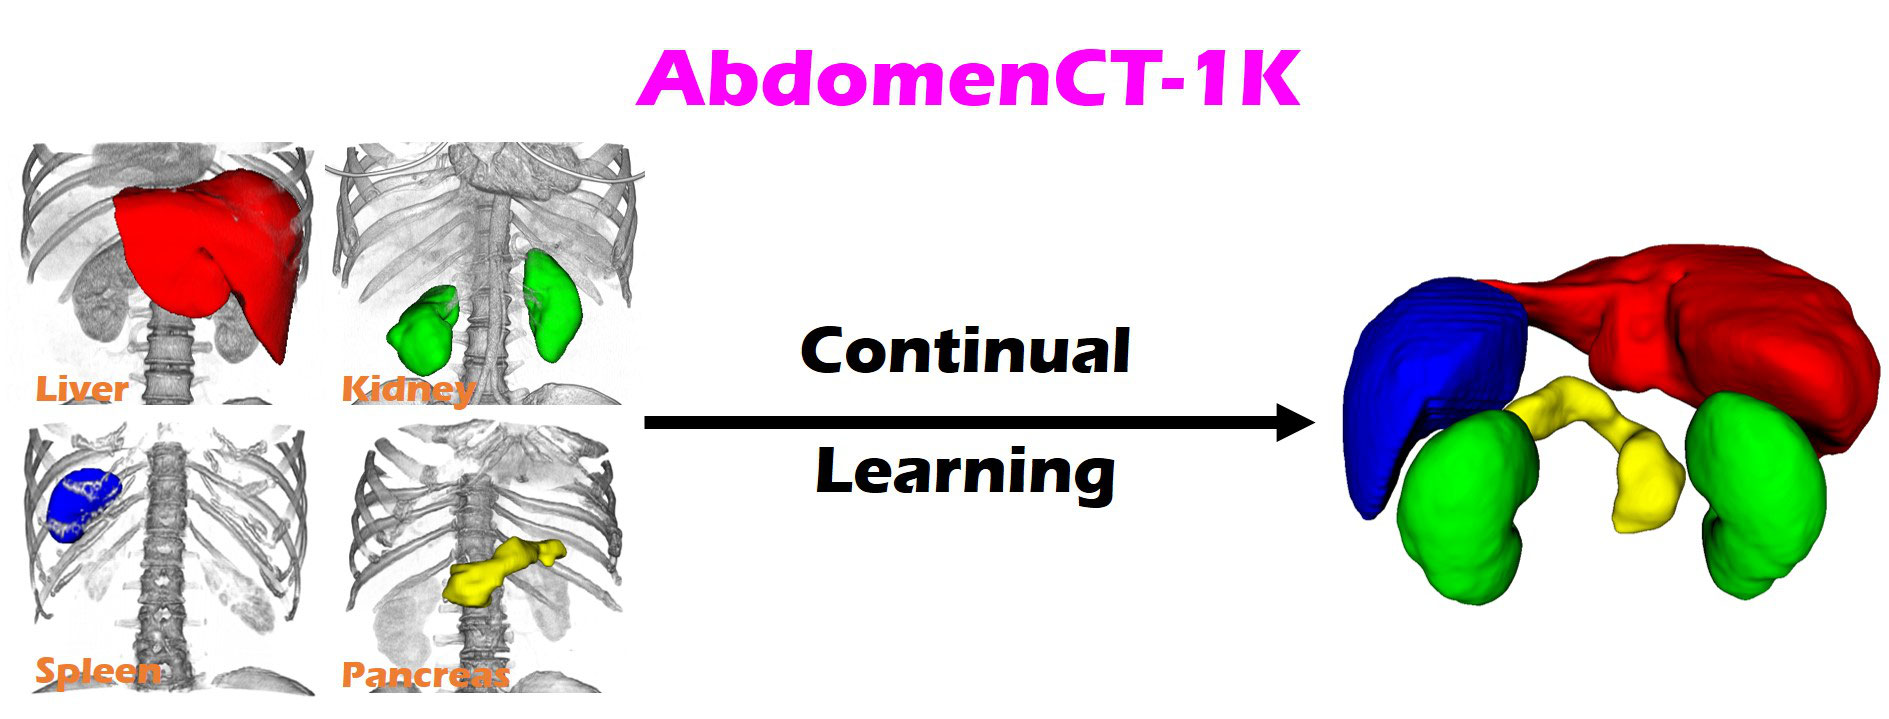 AbdomenCT-1K: Continual Learning Banner